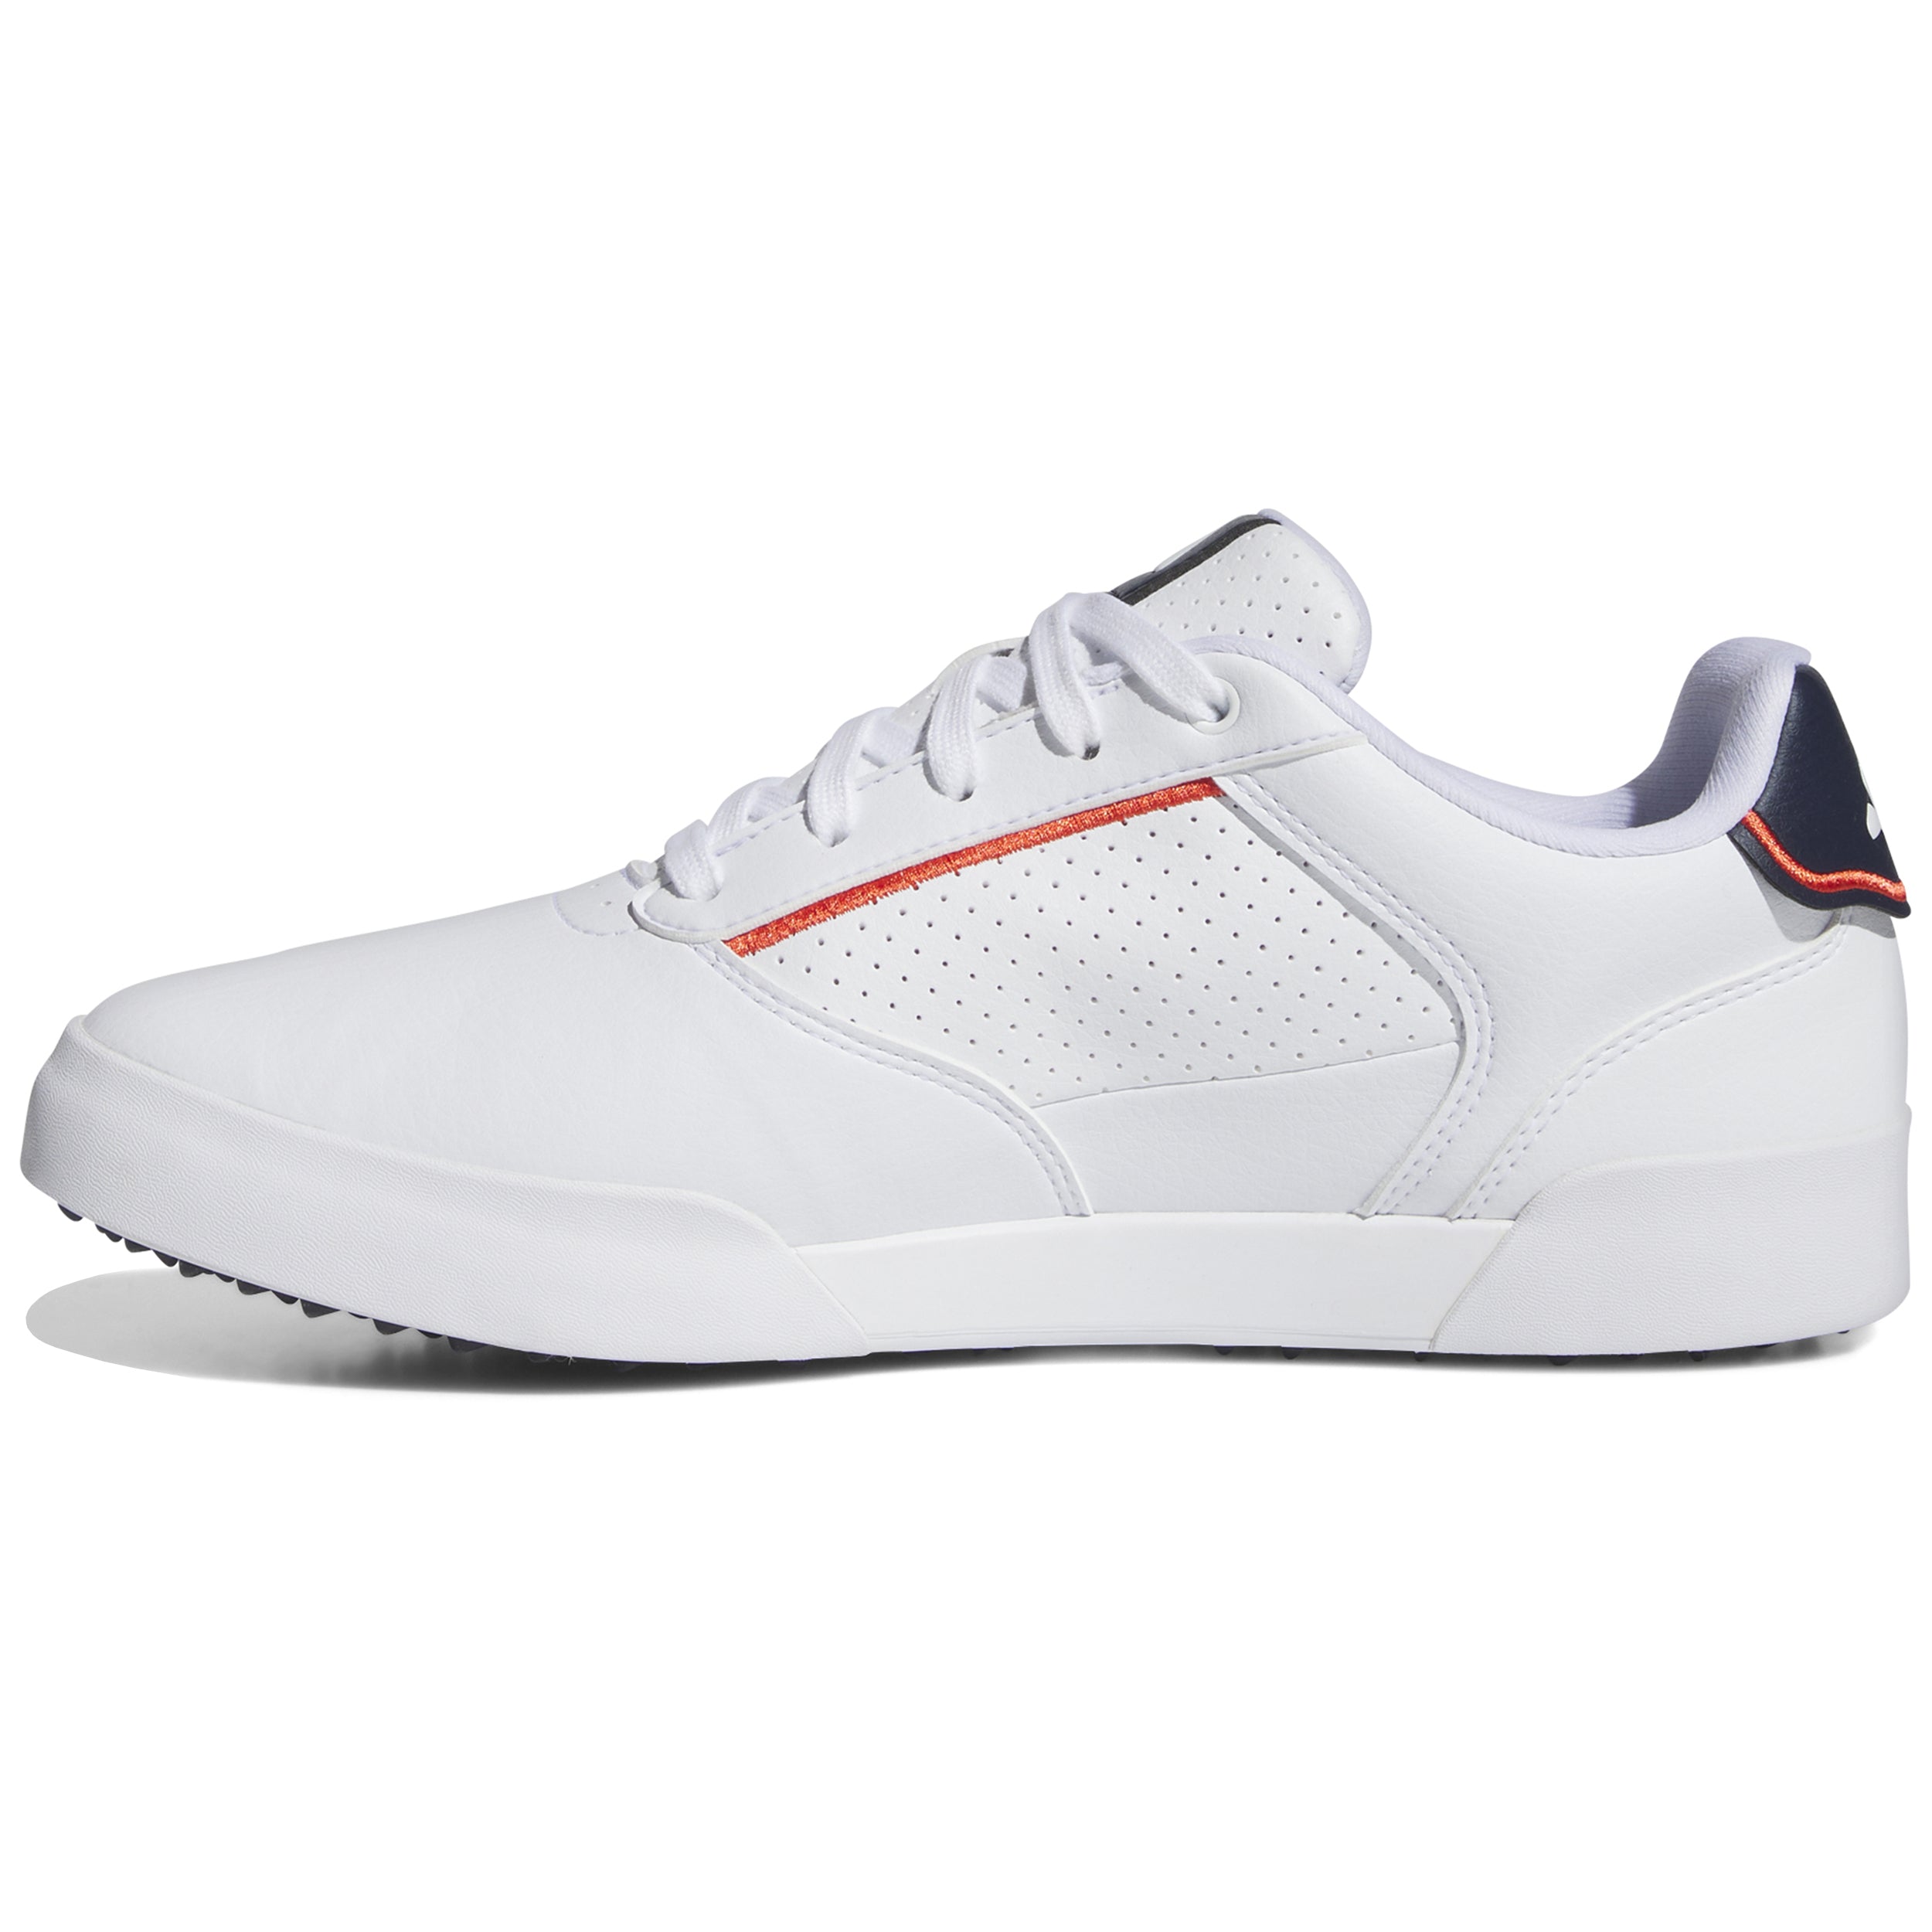 adidas Retrocross Golf Shoes IE2157 White Collegiate Navy | Function18